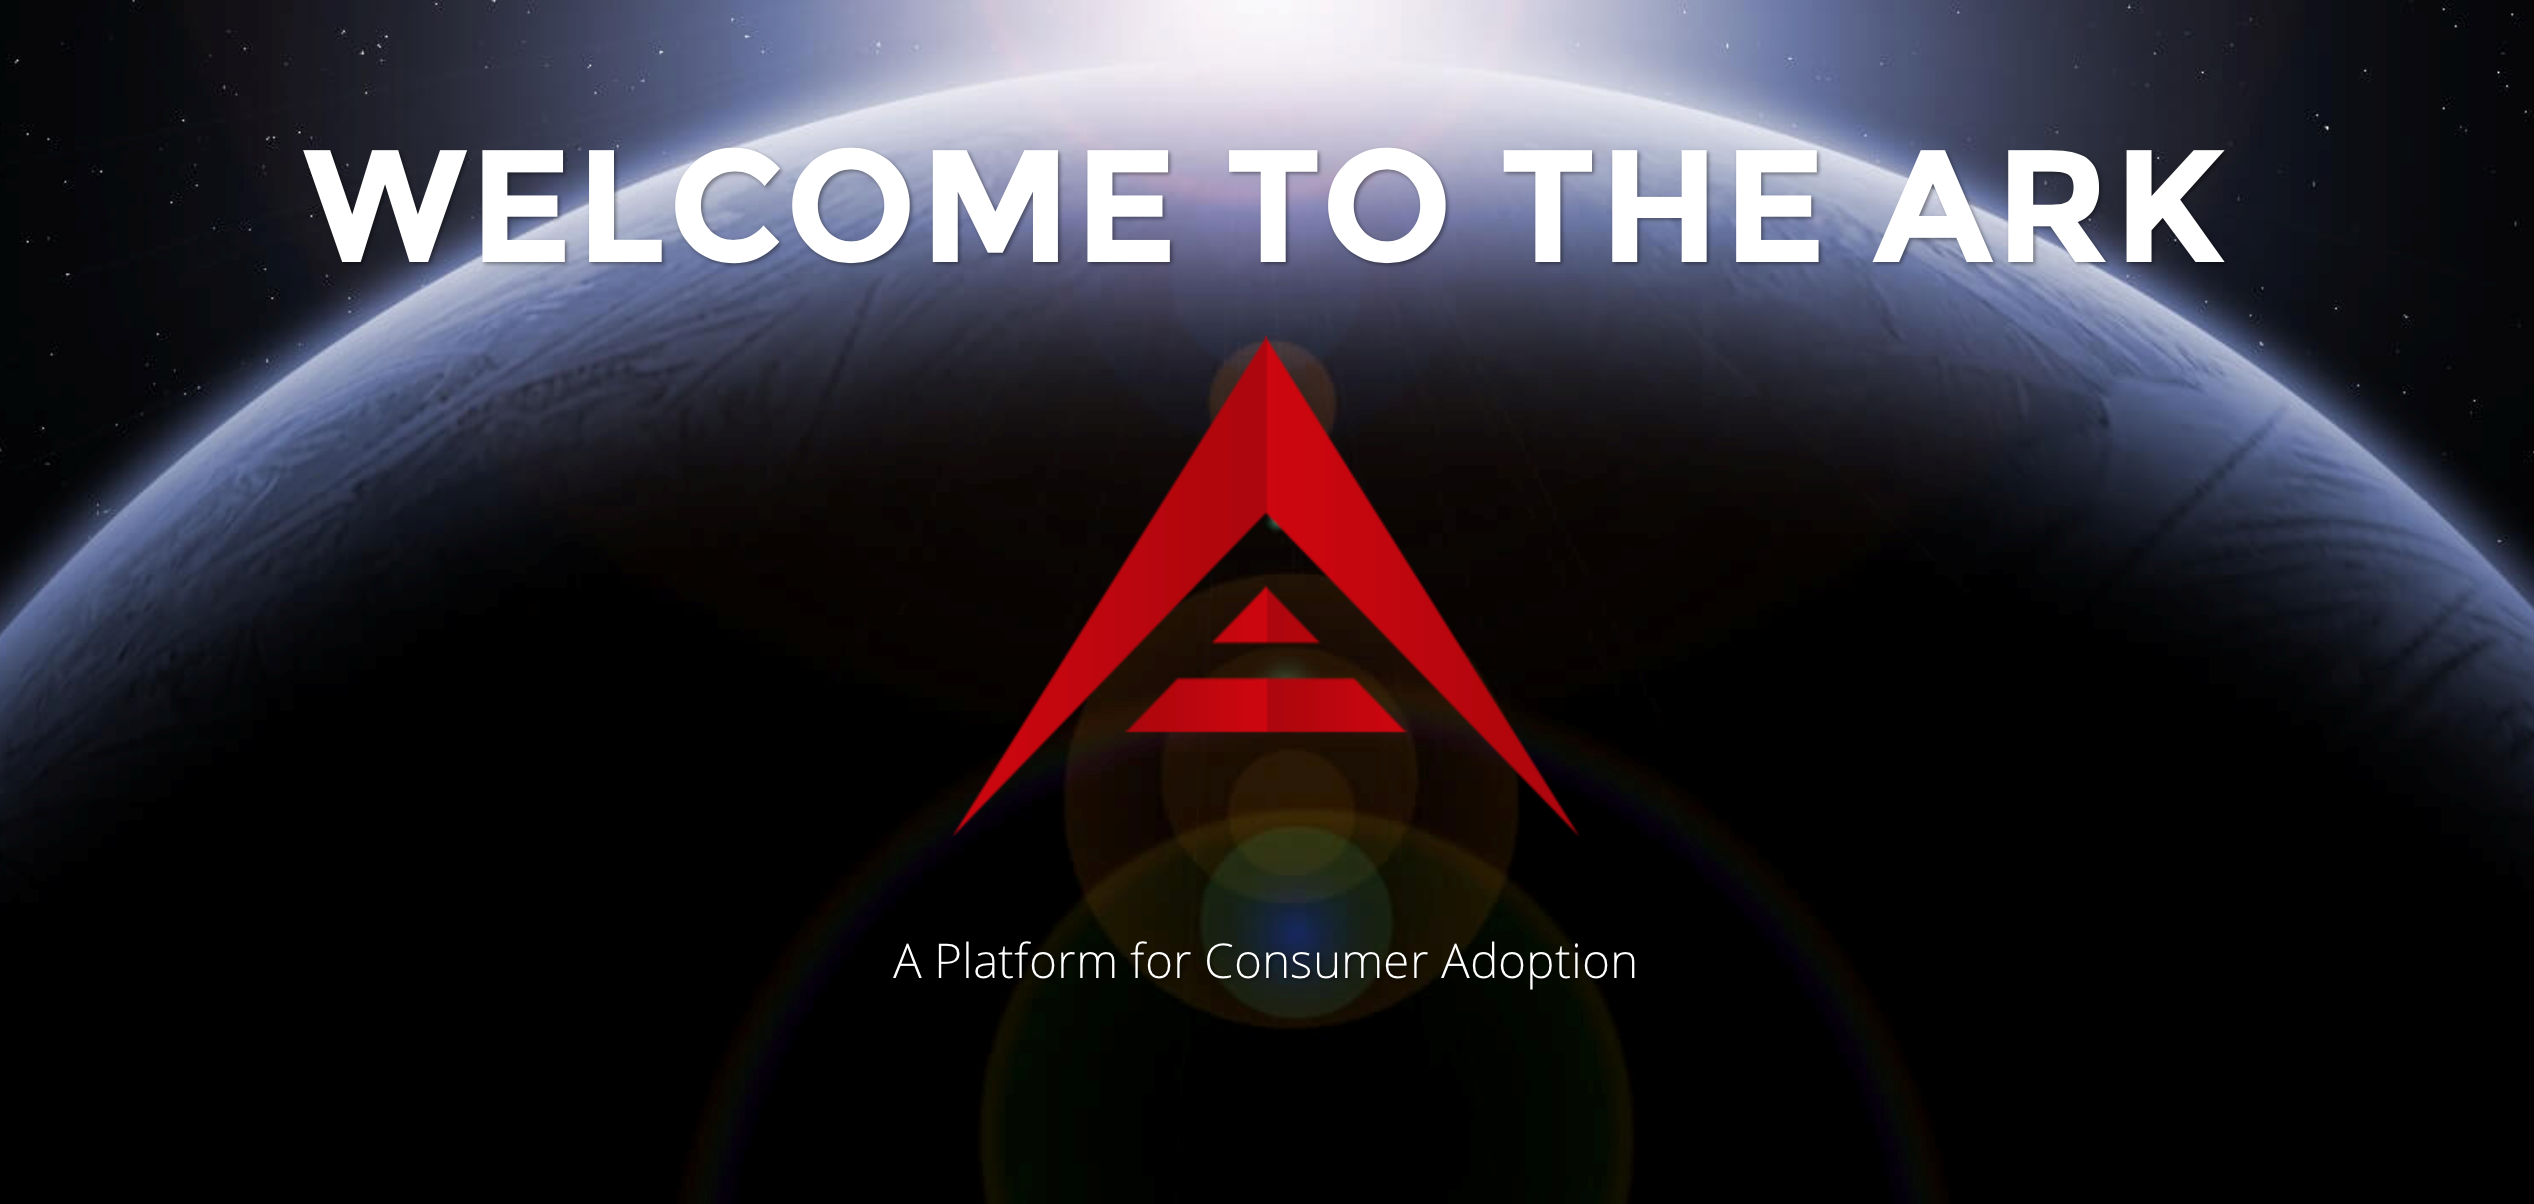 Ark Cryptocurrency News Ark News From All Around The Globe In One Place.